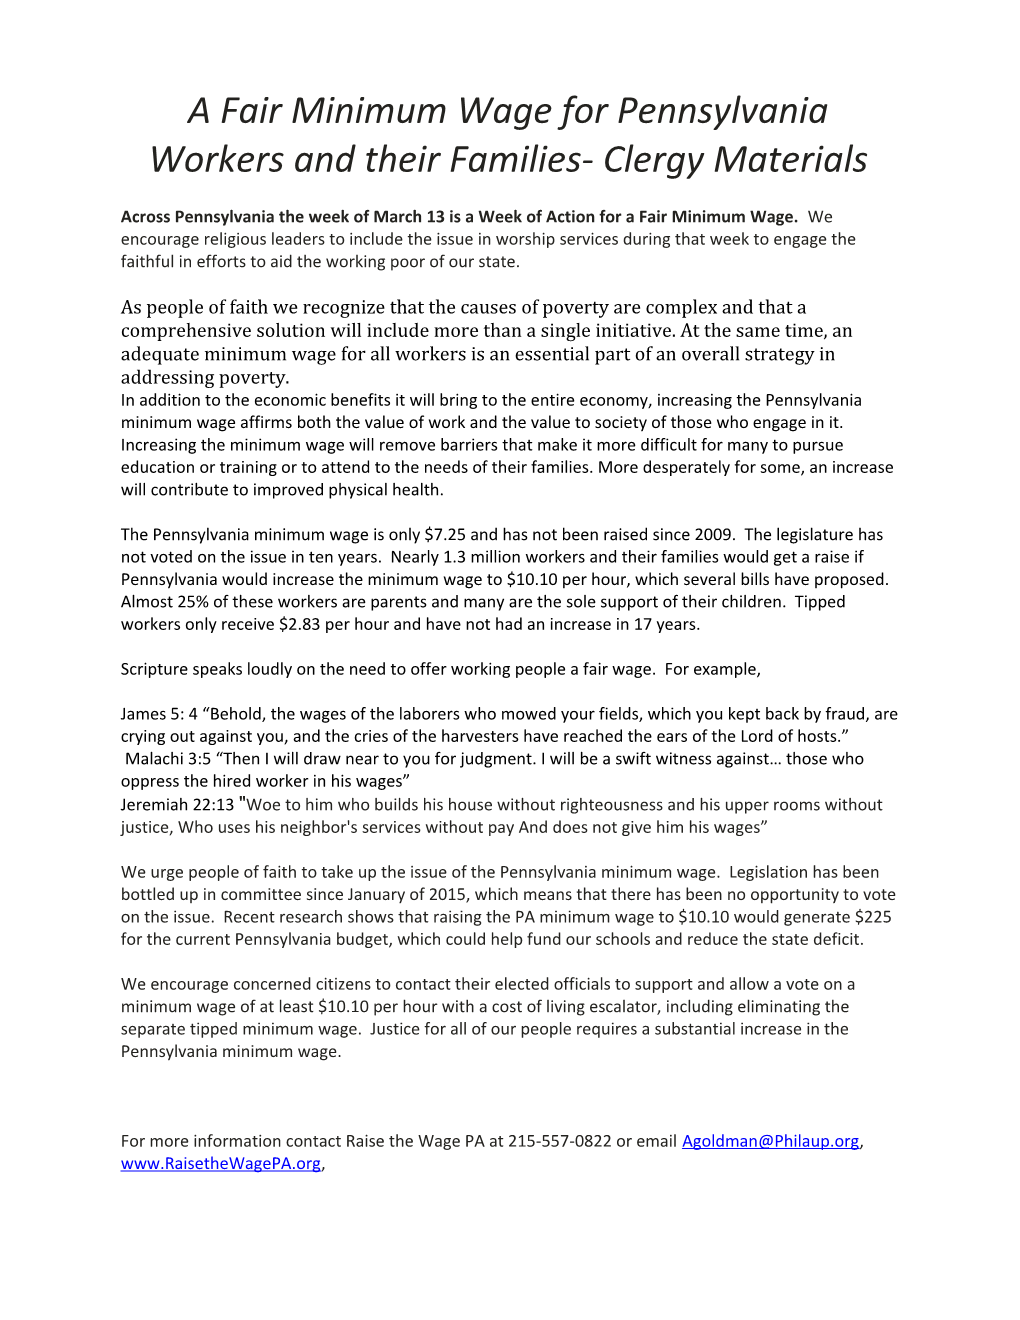 A Fair Minimum Wage for Pennsylvania Workers and Their Families- Clergy Materials